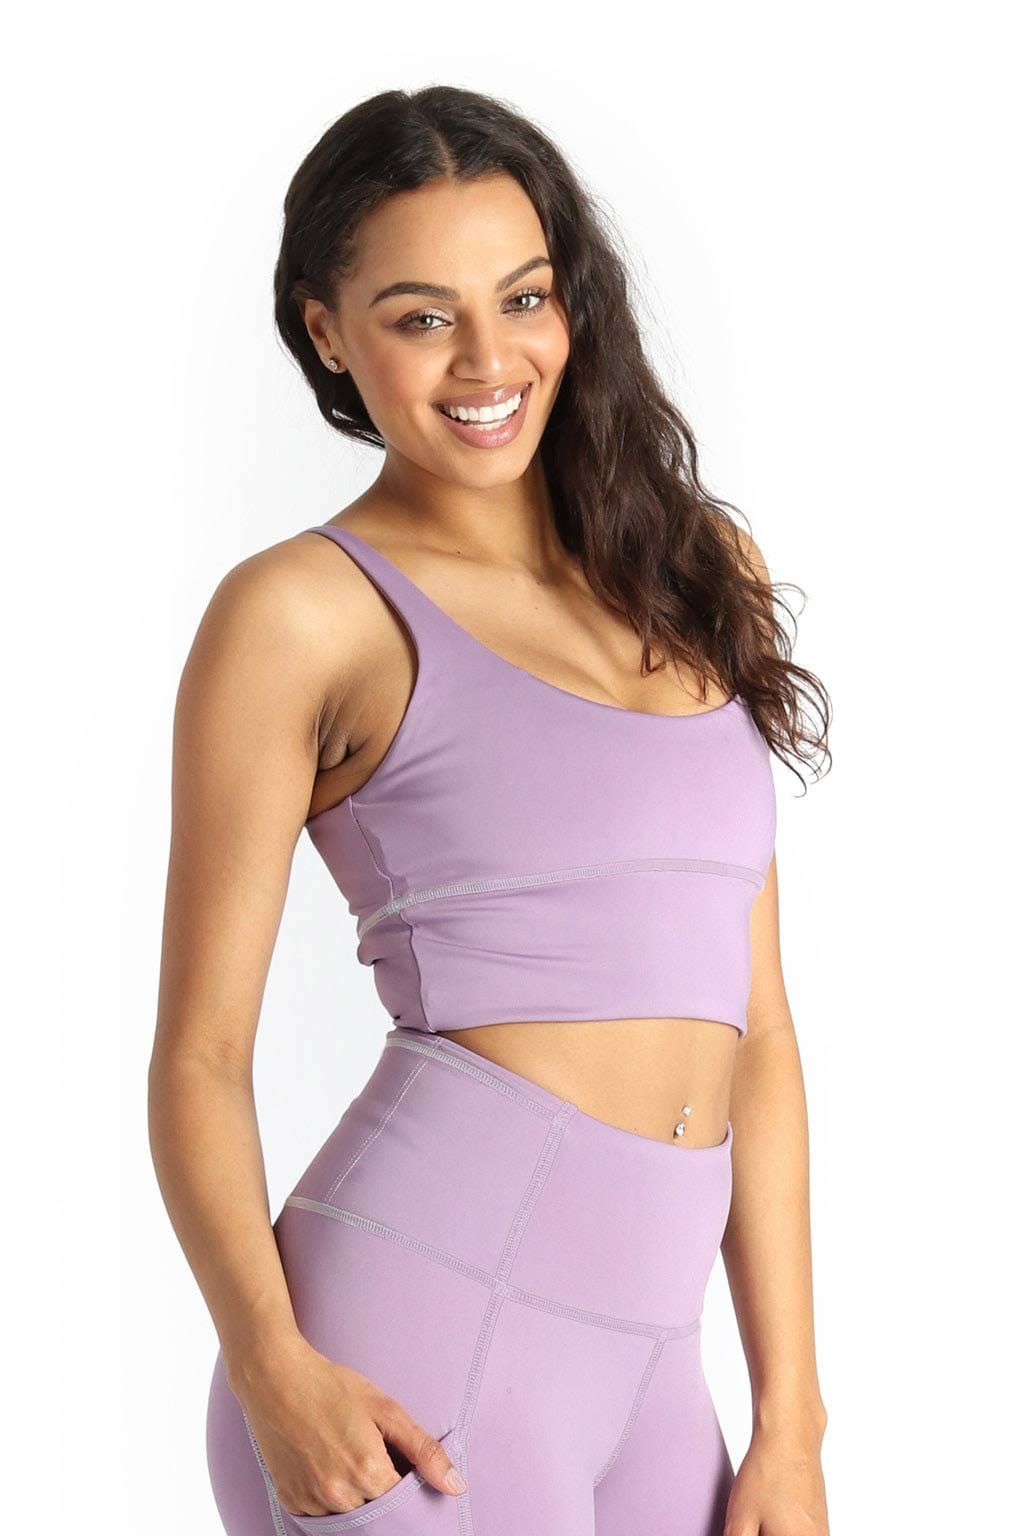 Limitless Sports Bra in Amethyst - Medium Support, A - E Cups